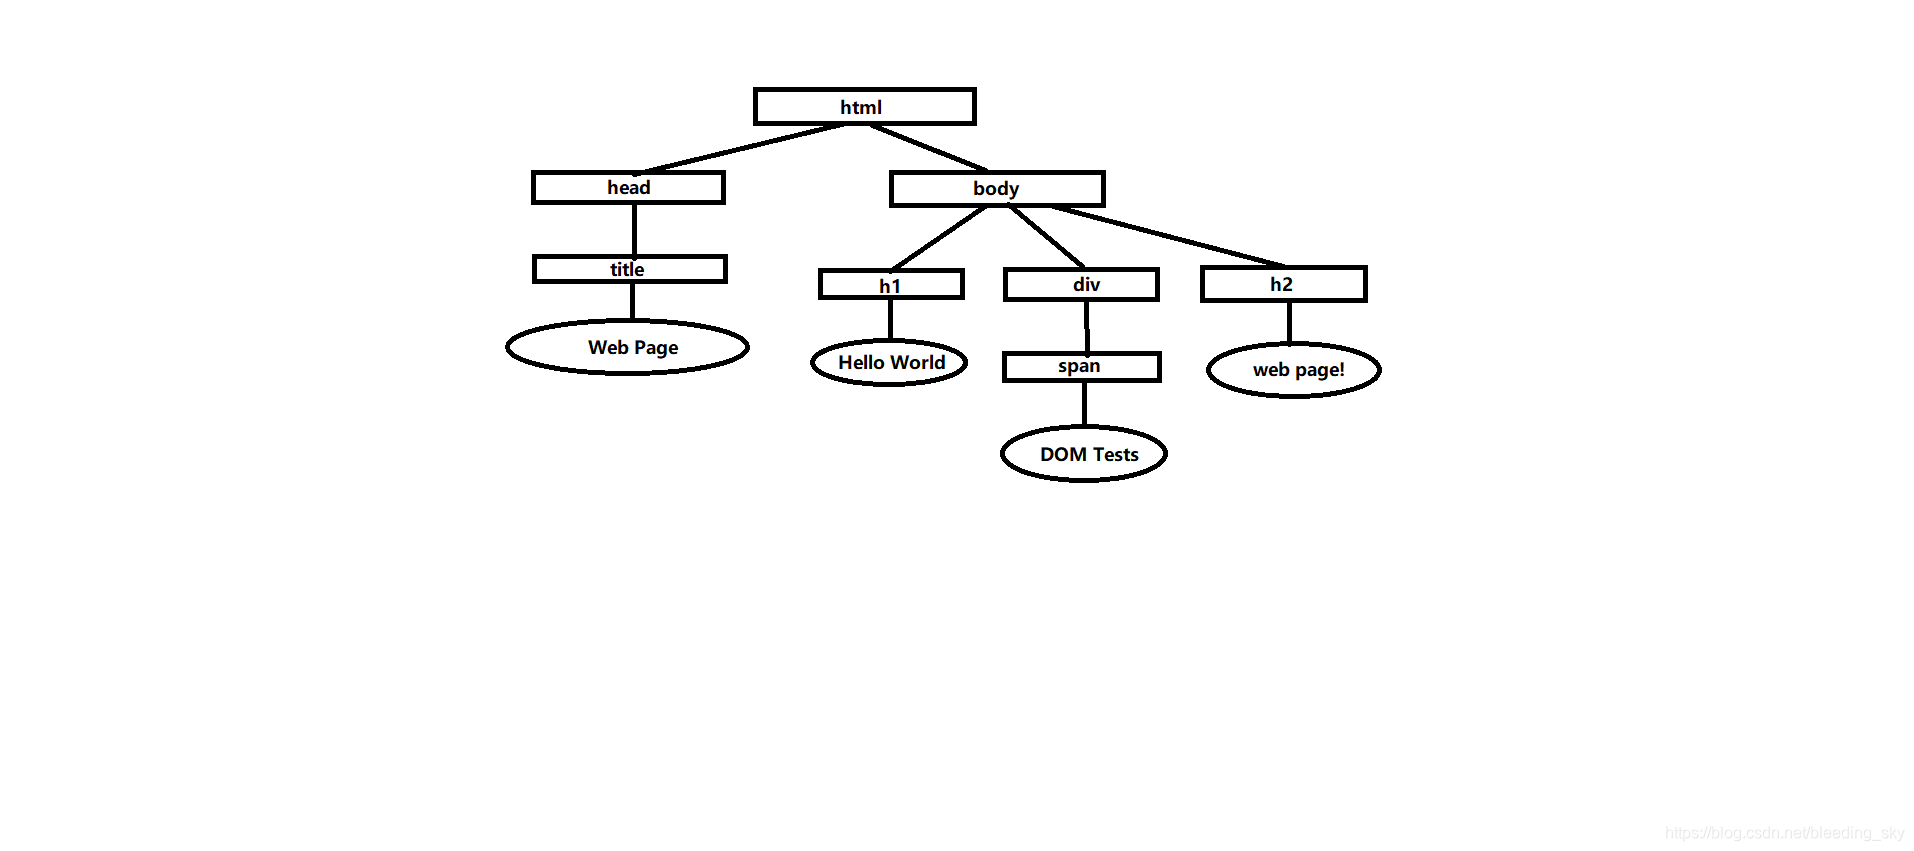 The code conversion DOM tree